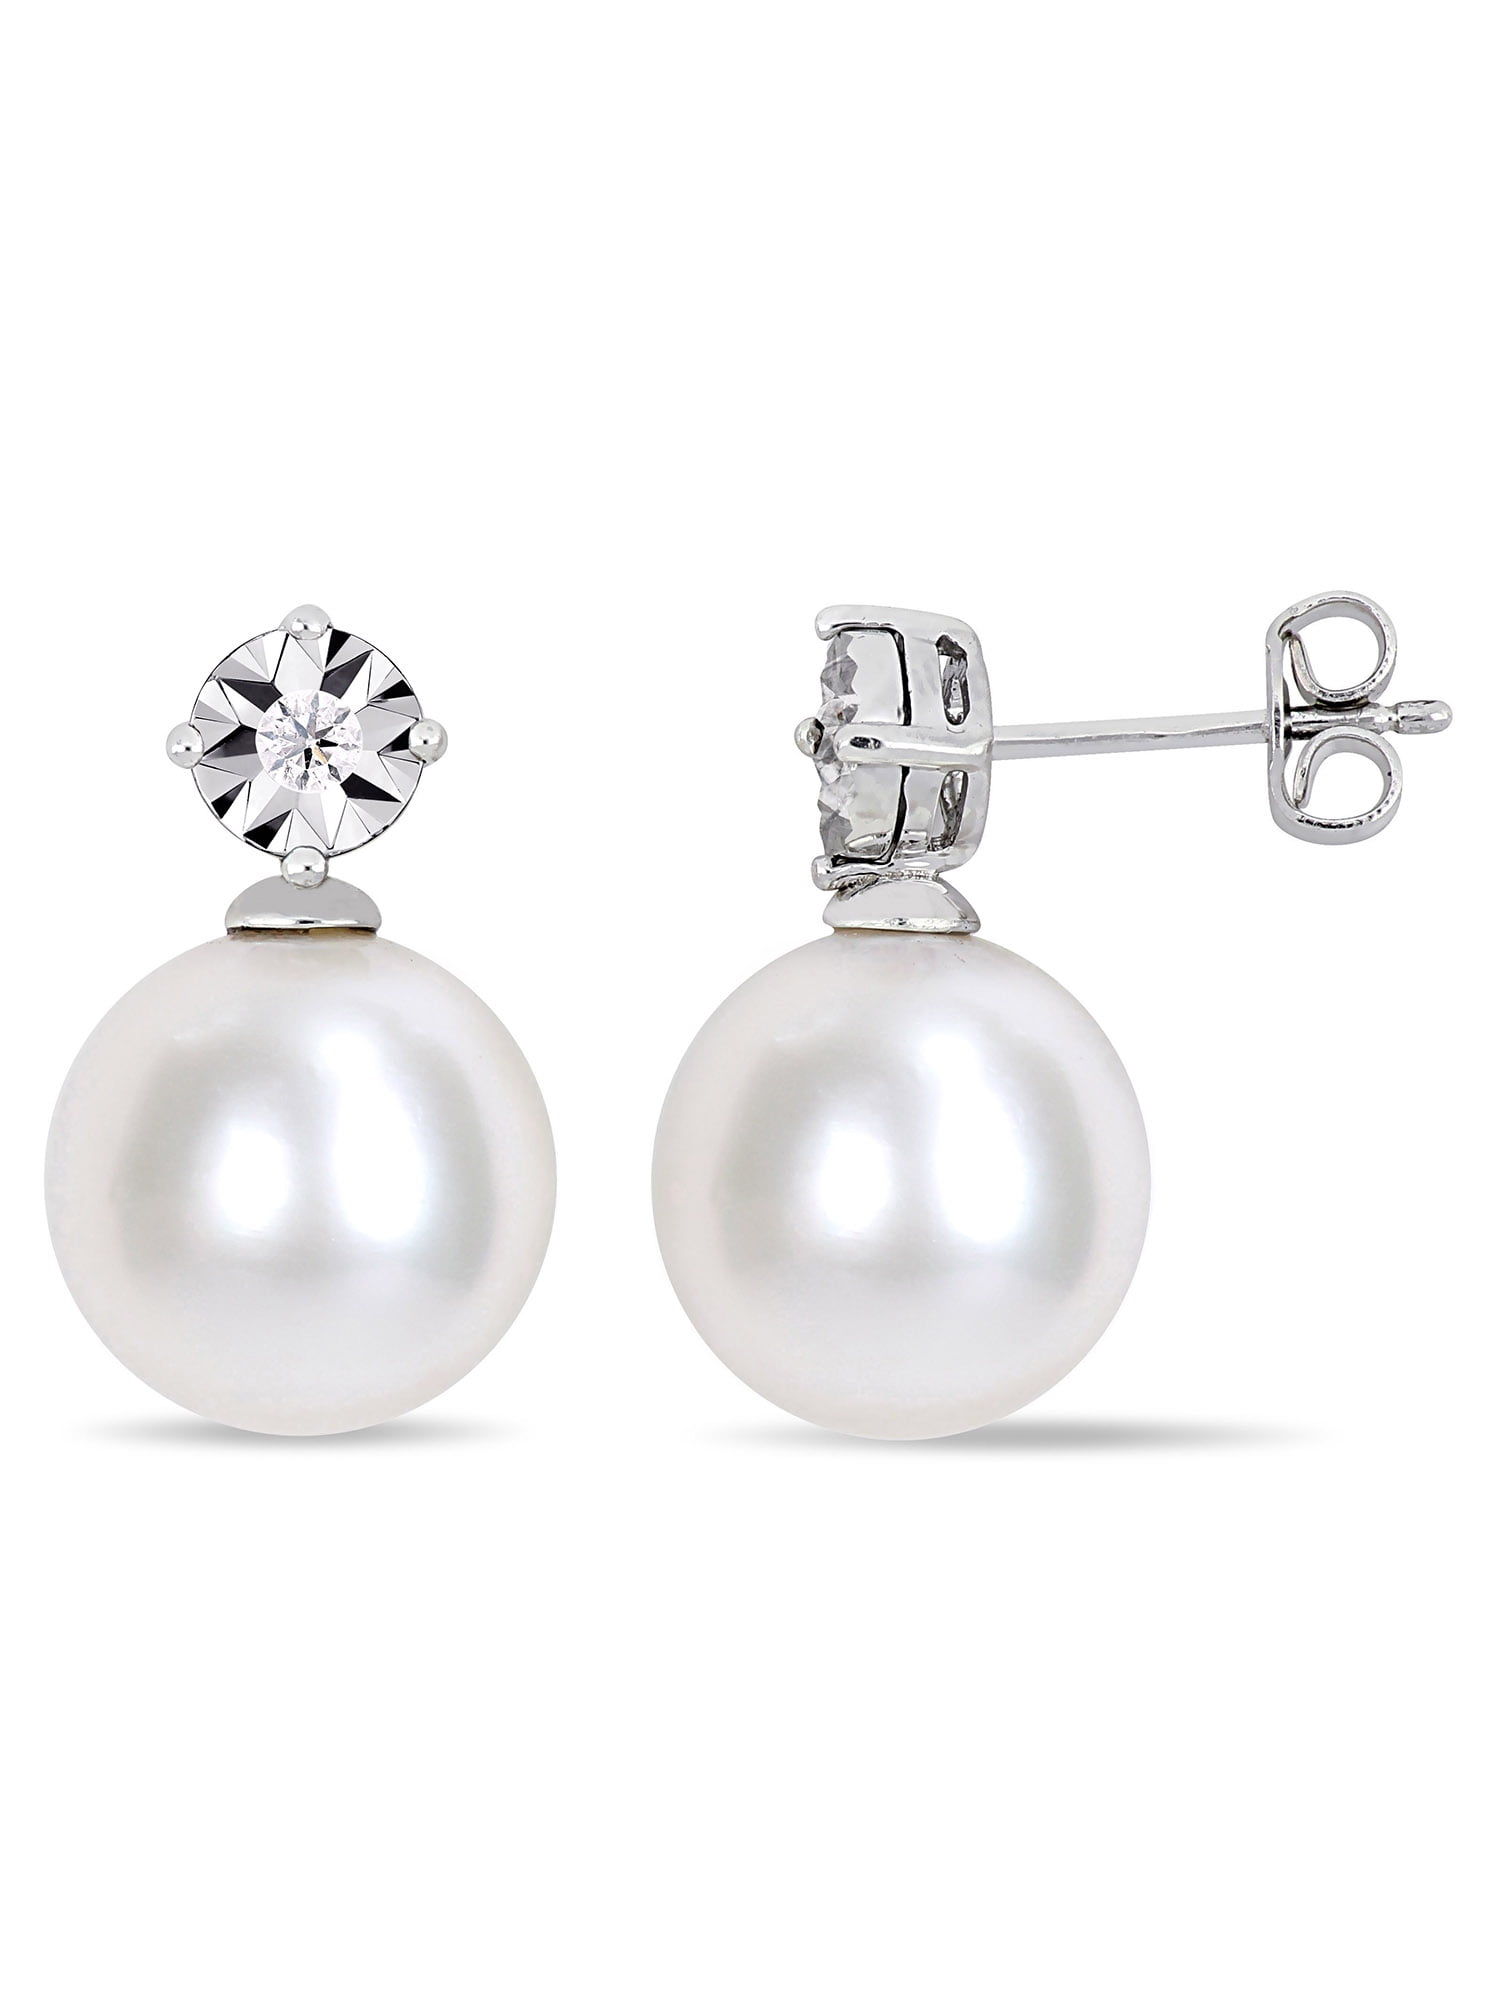 Triple White Freshwater Pearl & .925 STERLING SILVER Earrings Handcrafted